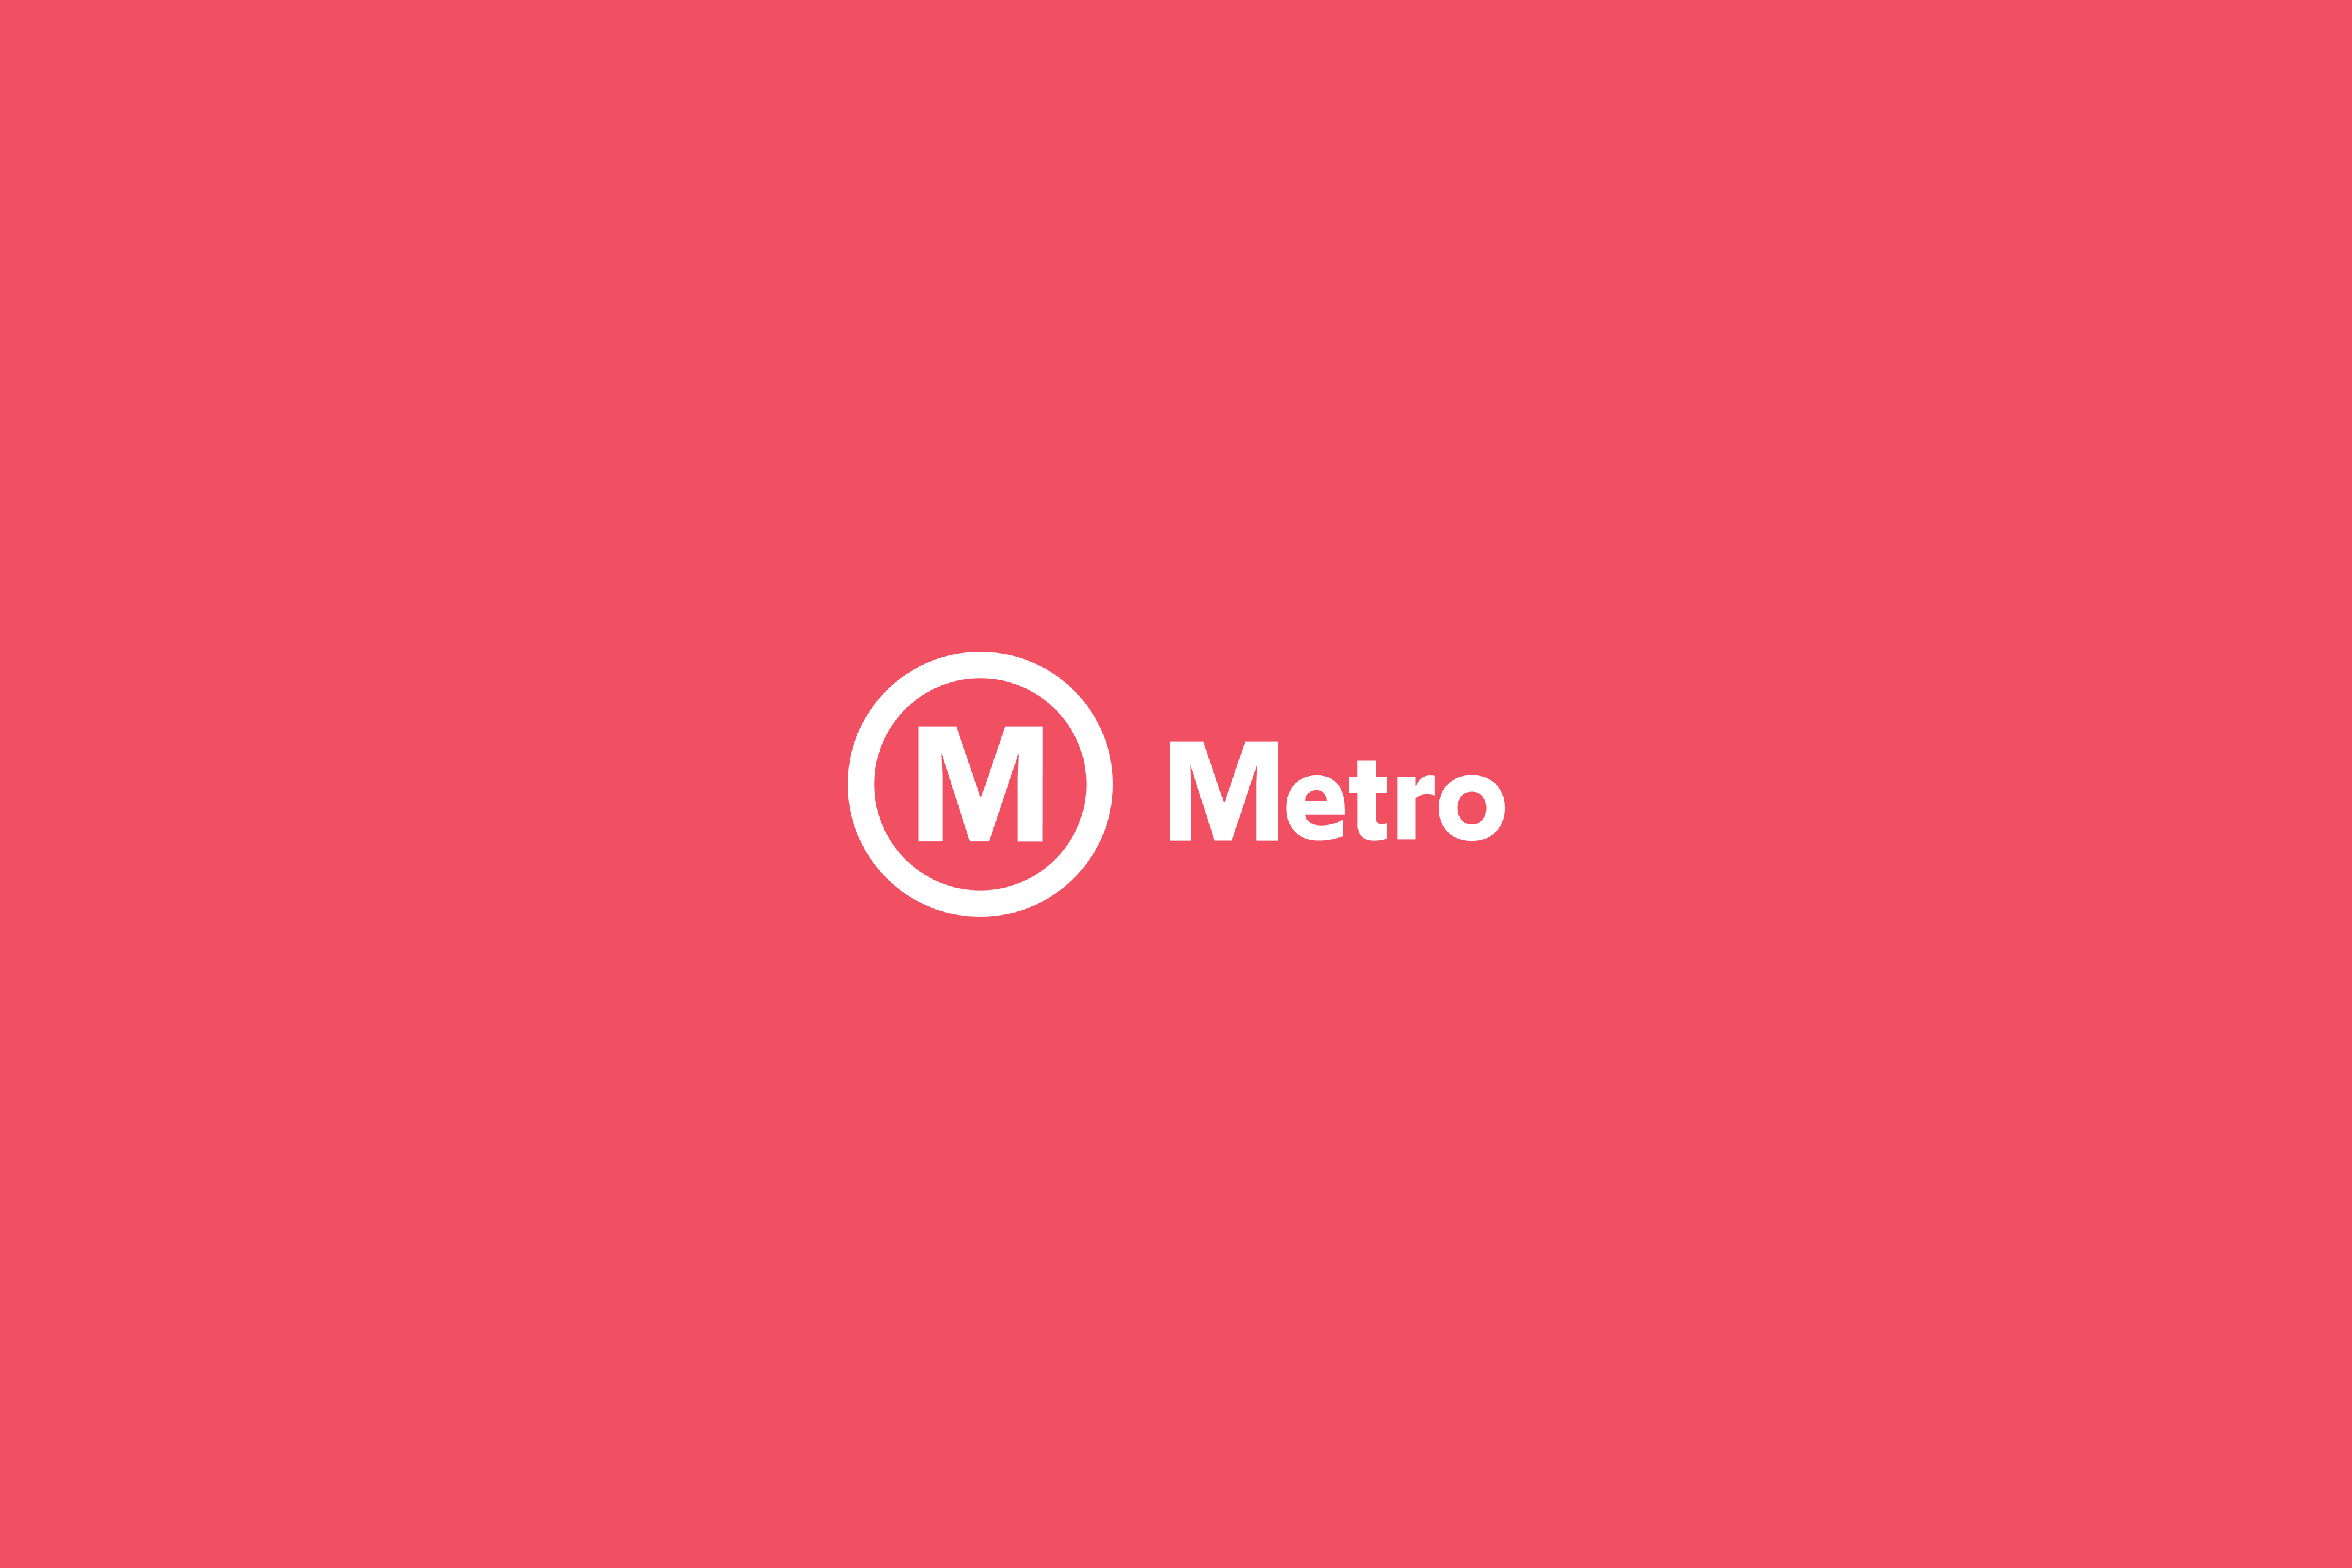 How can West Yorkshire Metro shift towards a user-centered approach? - Part 1 The Brand